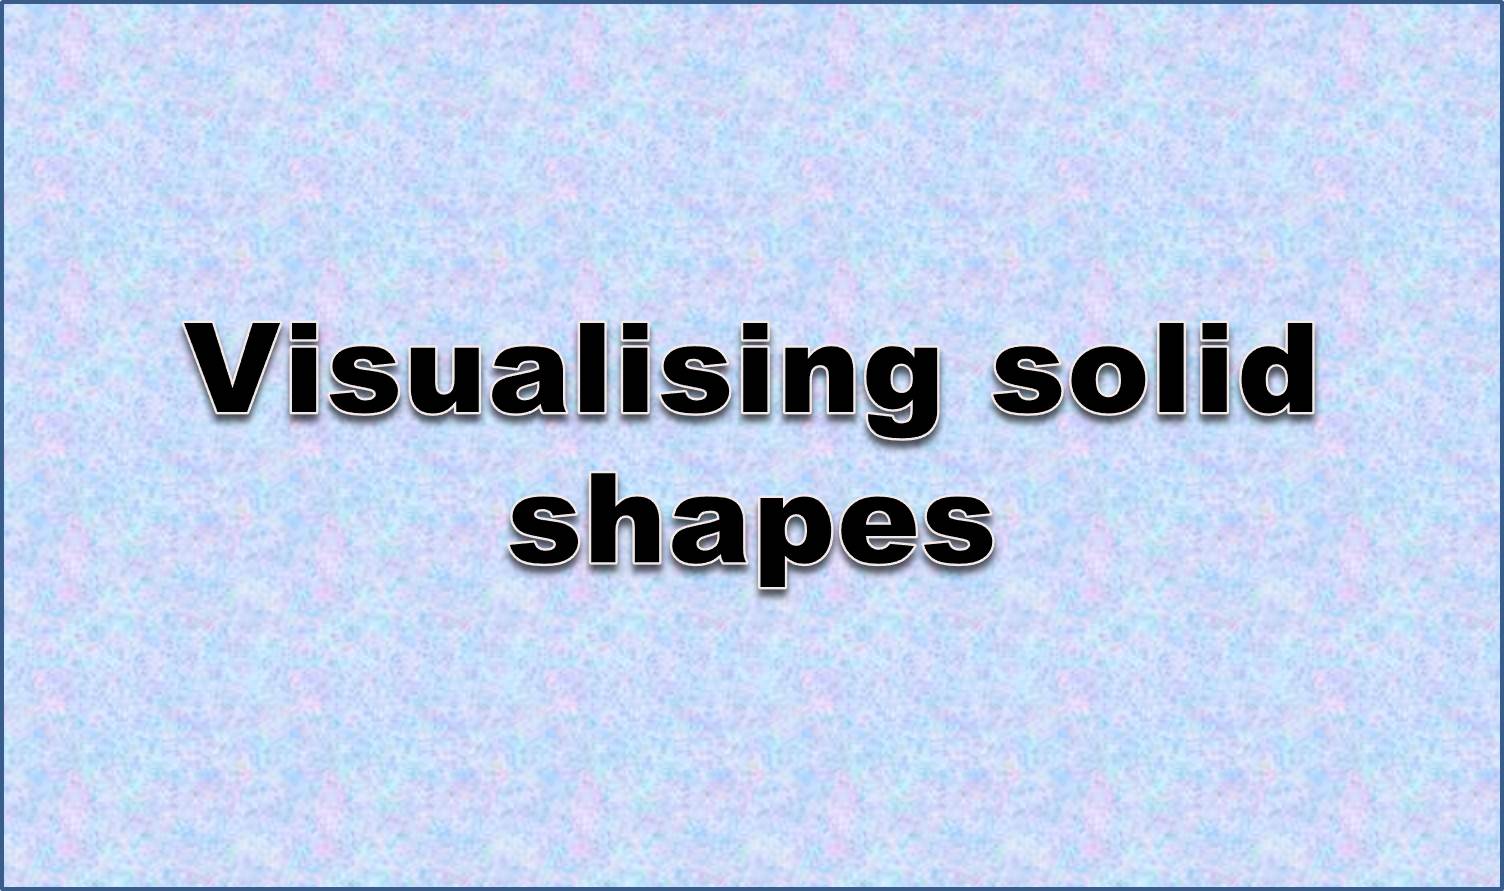 http://study.aisectonline.com/images/Solving a scale drawing word problem.jpg